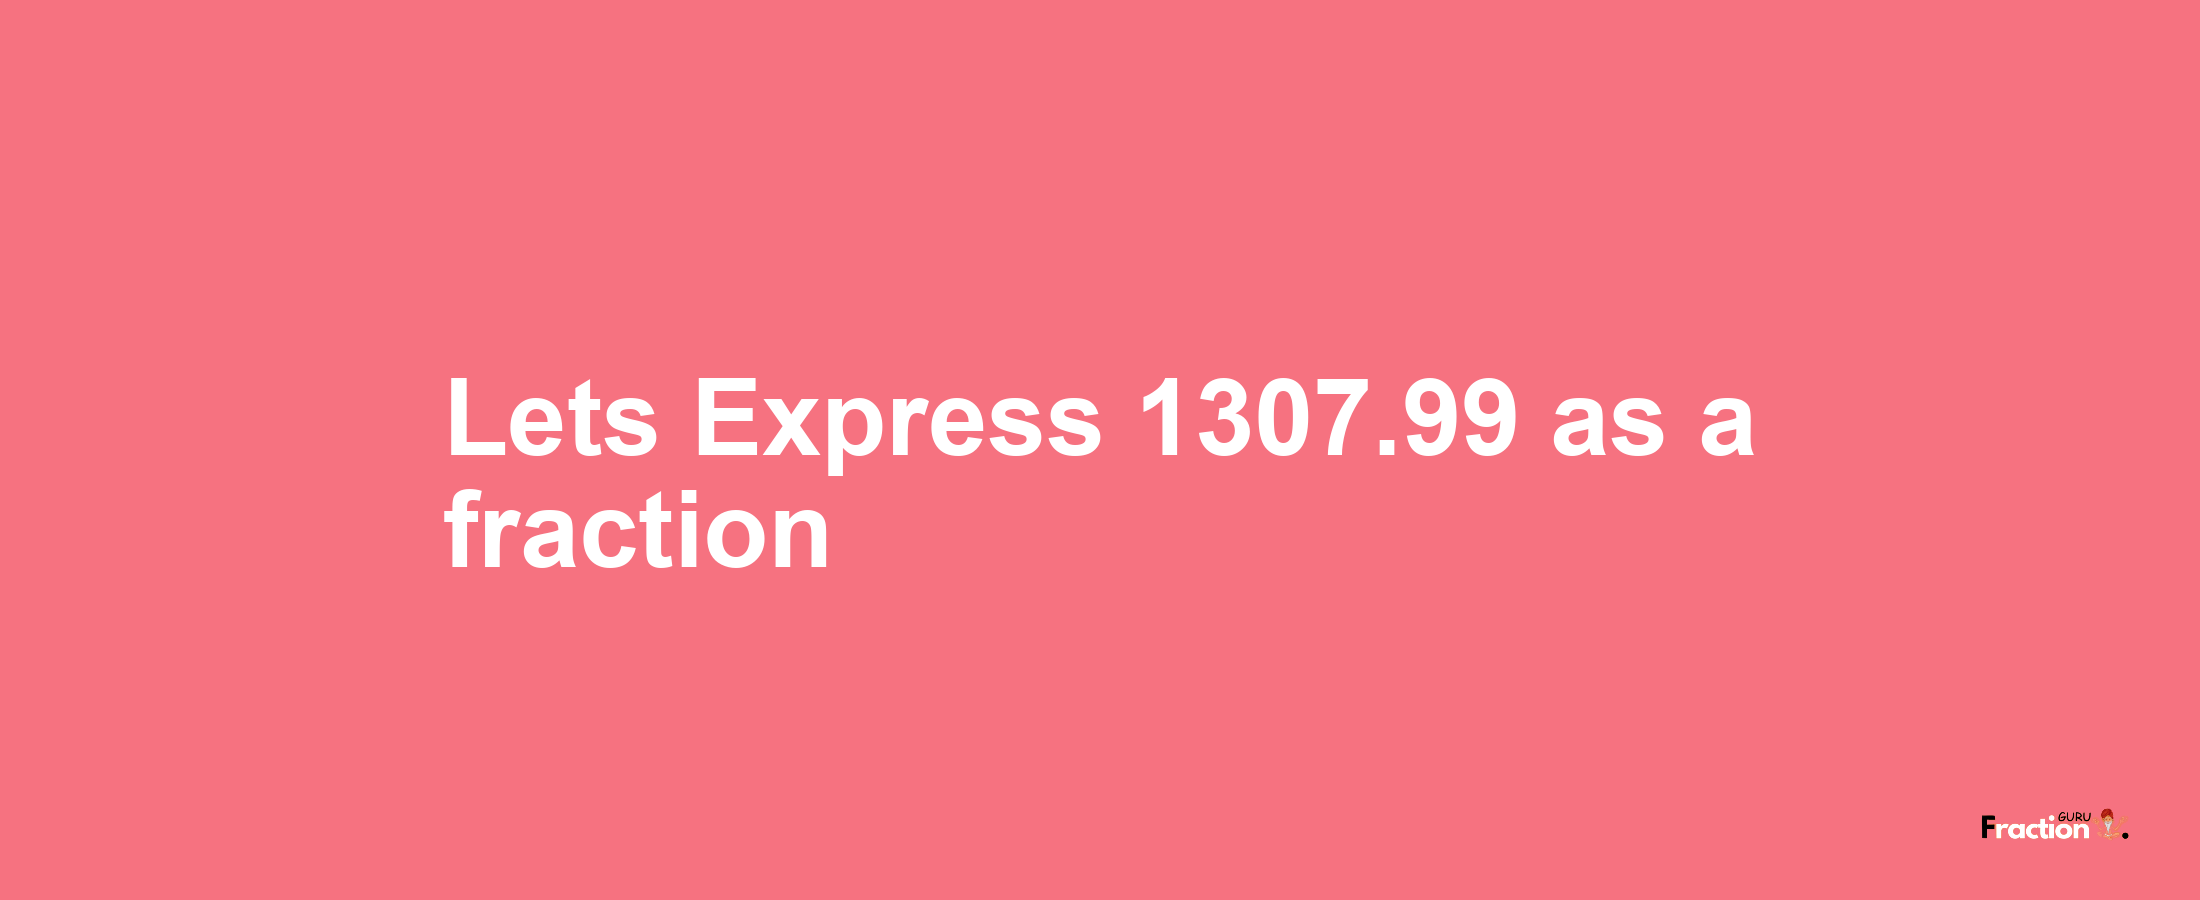 Lets Express 1307.99 as afraction